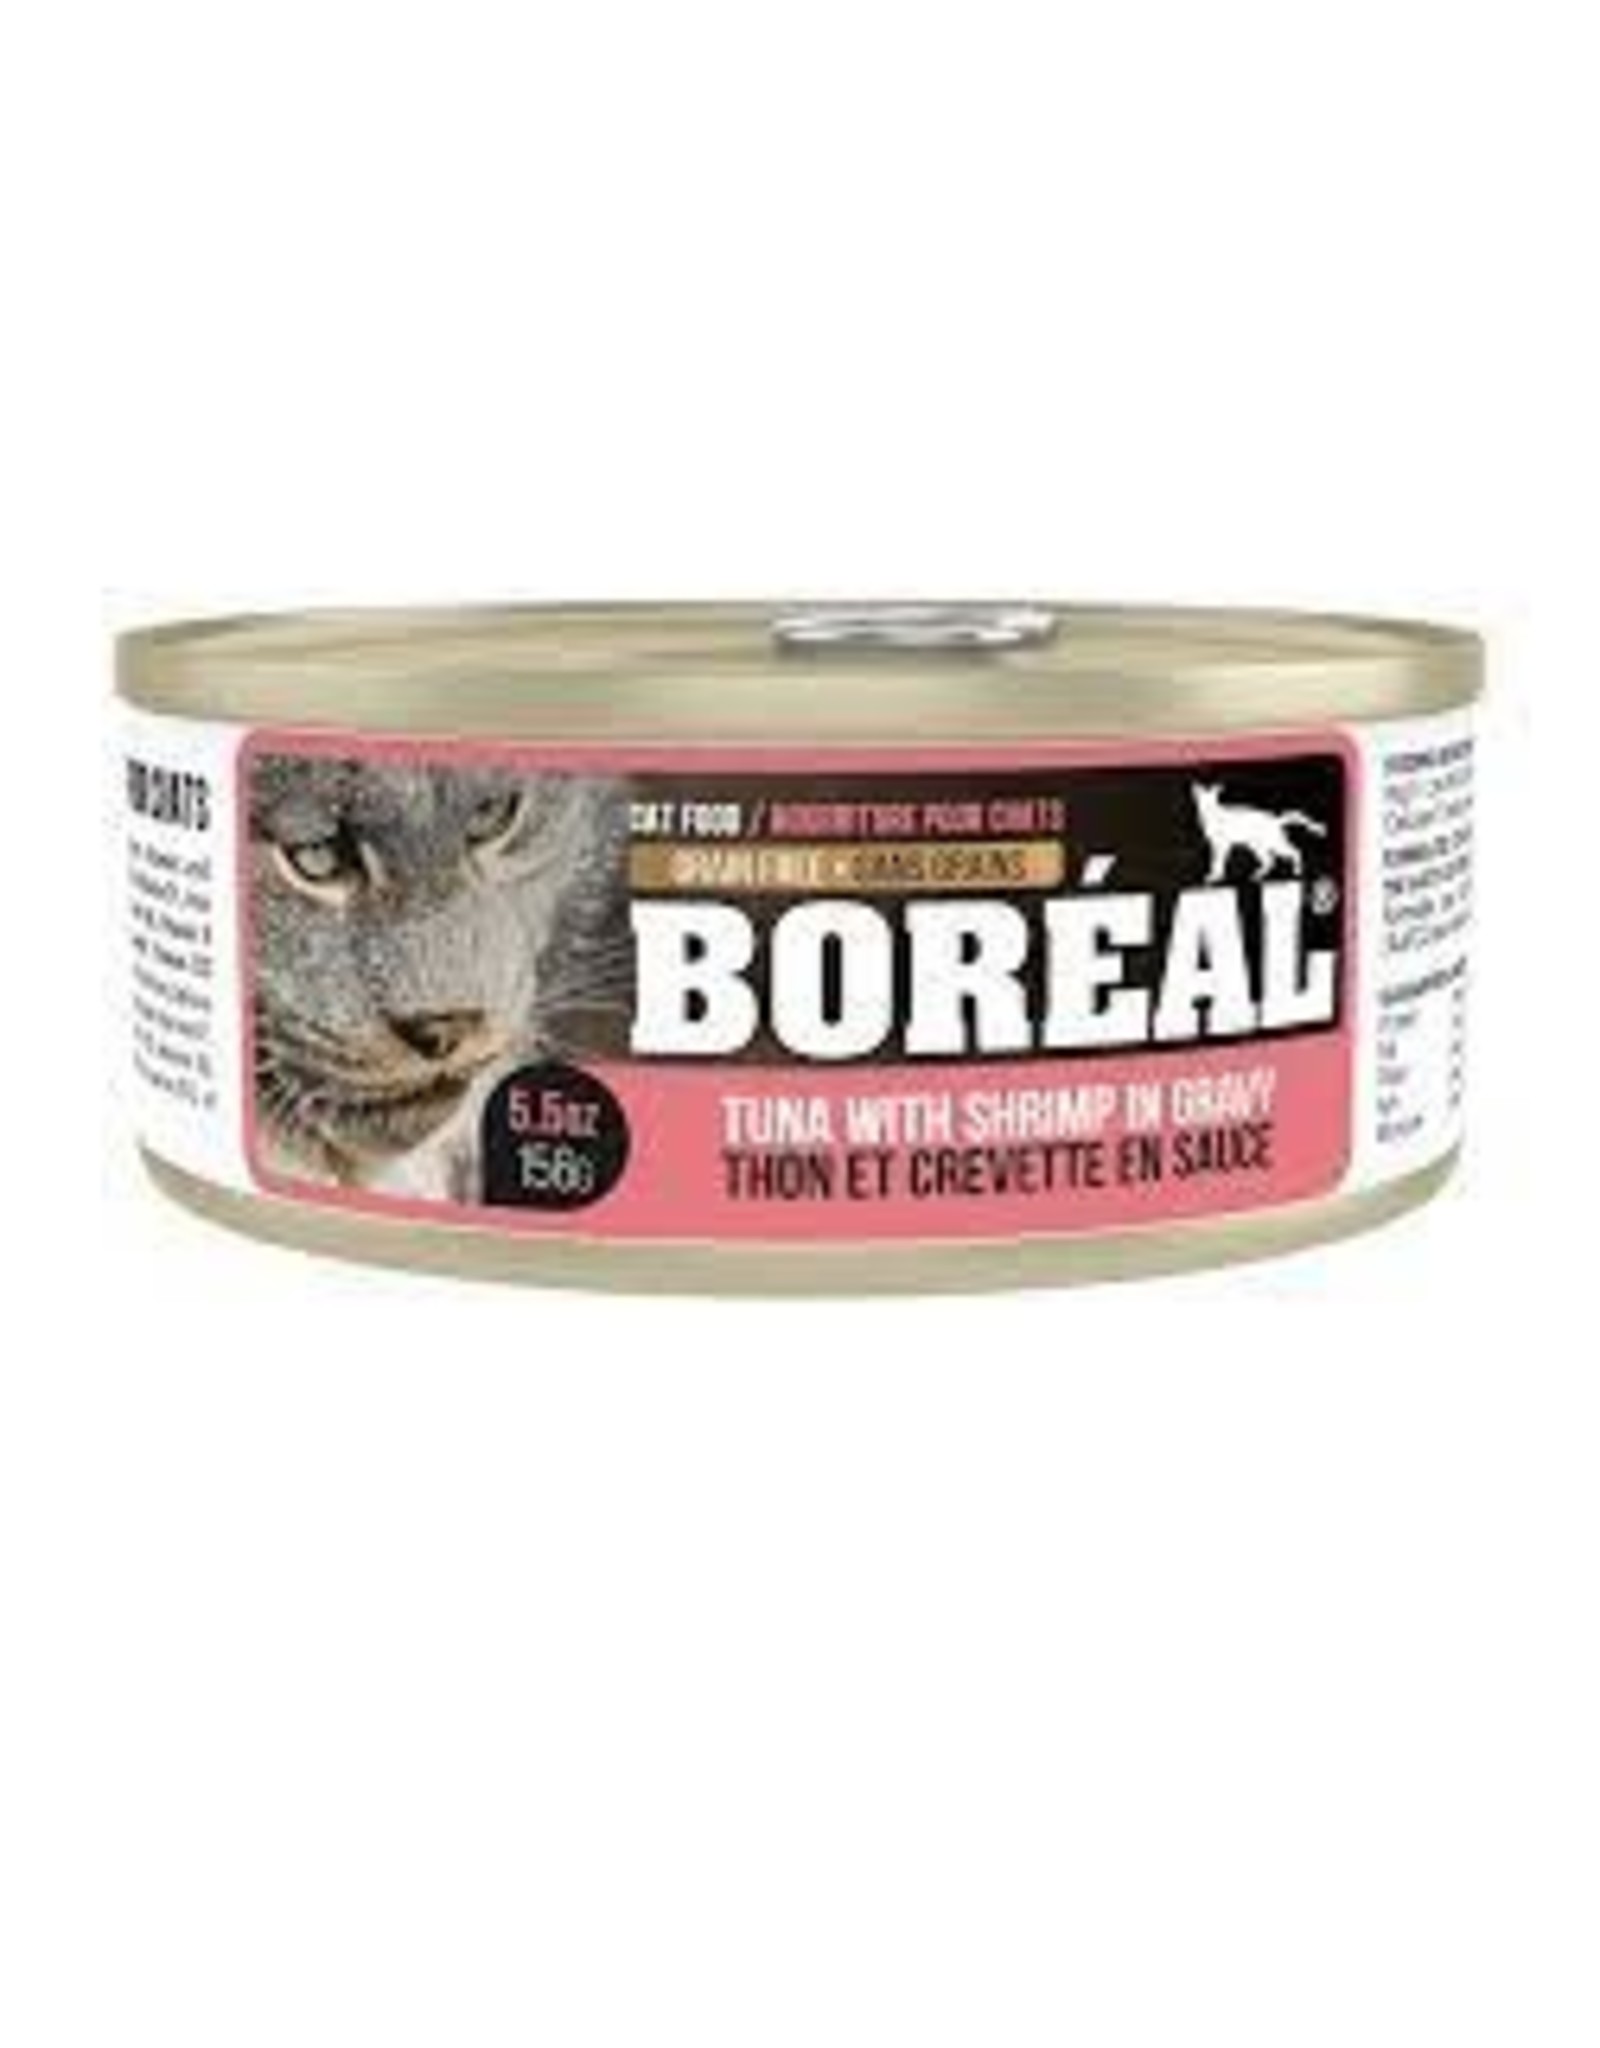 Boreal Boreal Tuna Red Meat in Gravy with Shrimp - Single Can, 5.5oz